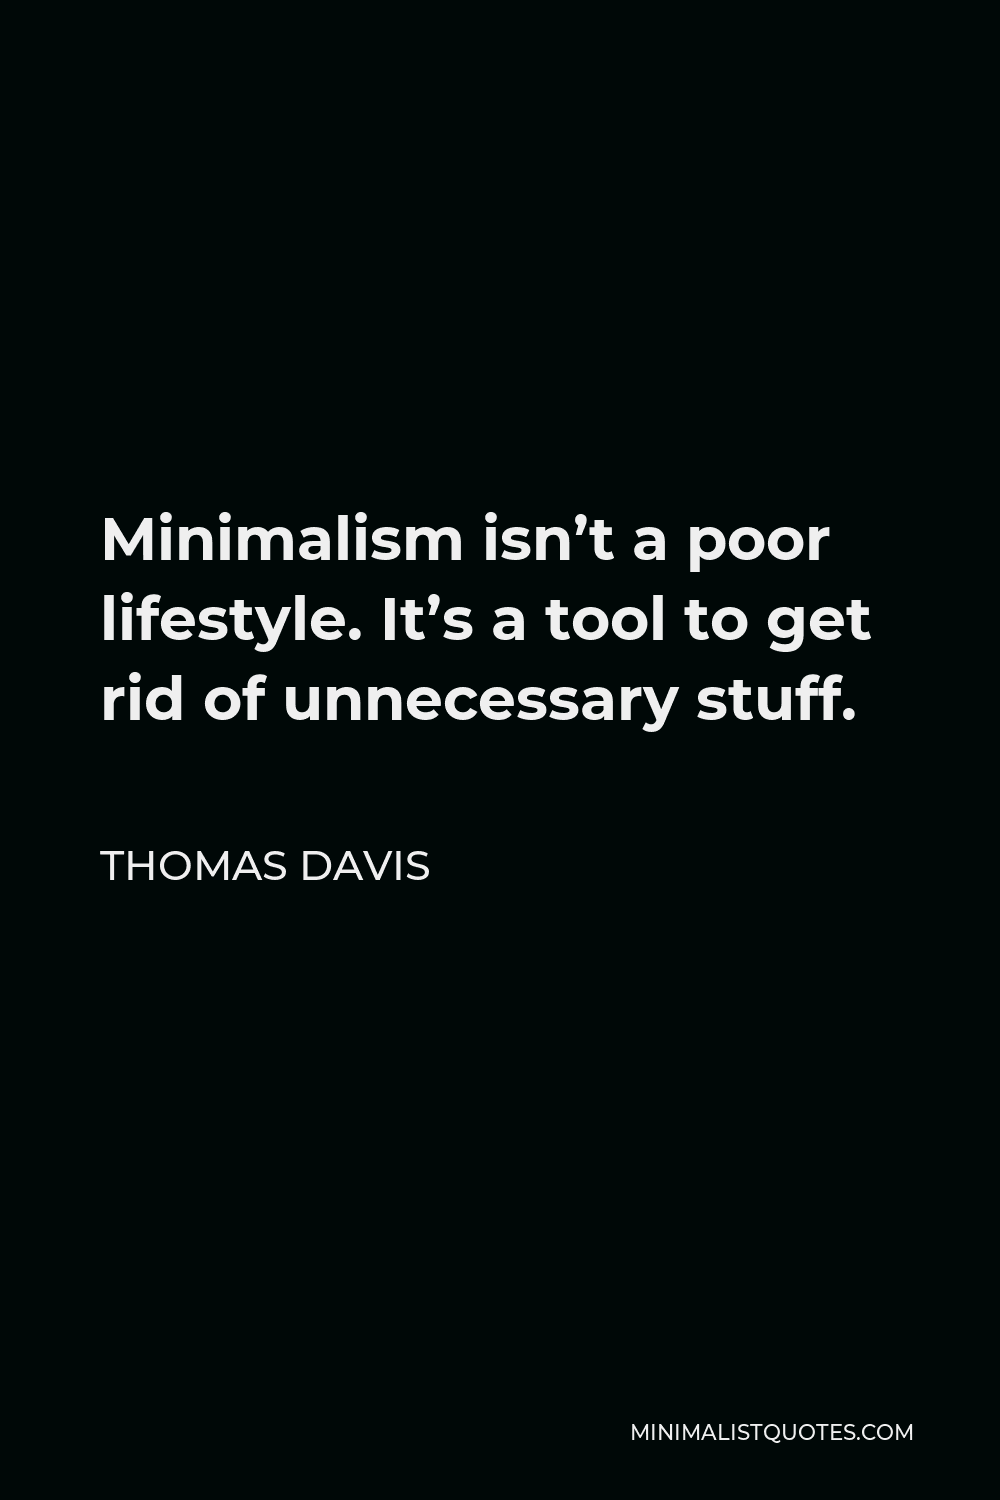 Thomas Davis Quote - Minimalism isn’t a poor lifestyle. It’s a tool to get rid of unnecessary stuff.